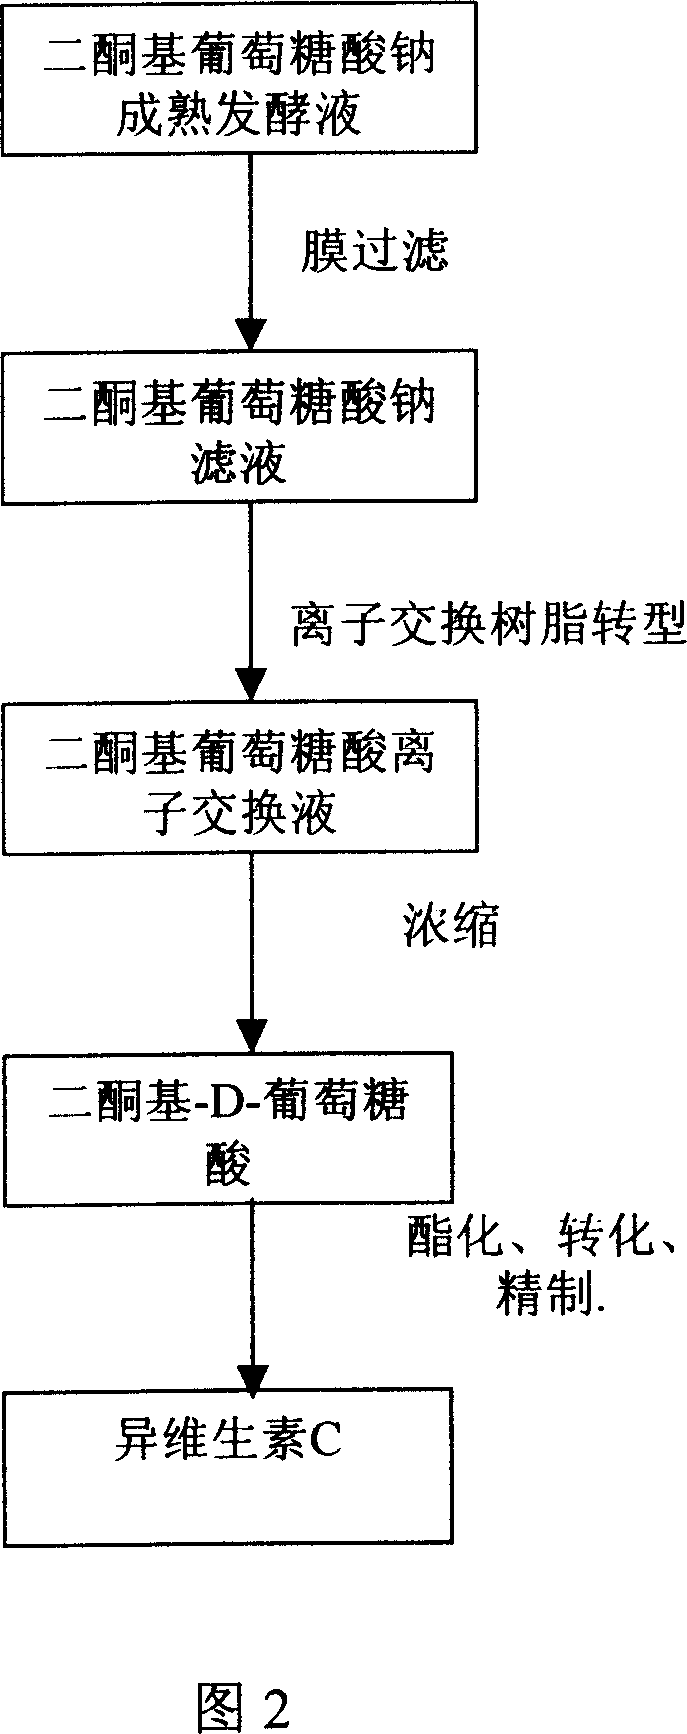 Process for producing isovitamine C by membrane-resin method